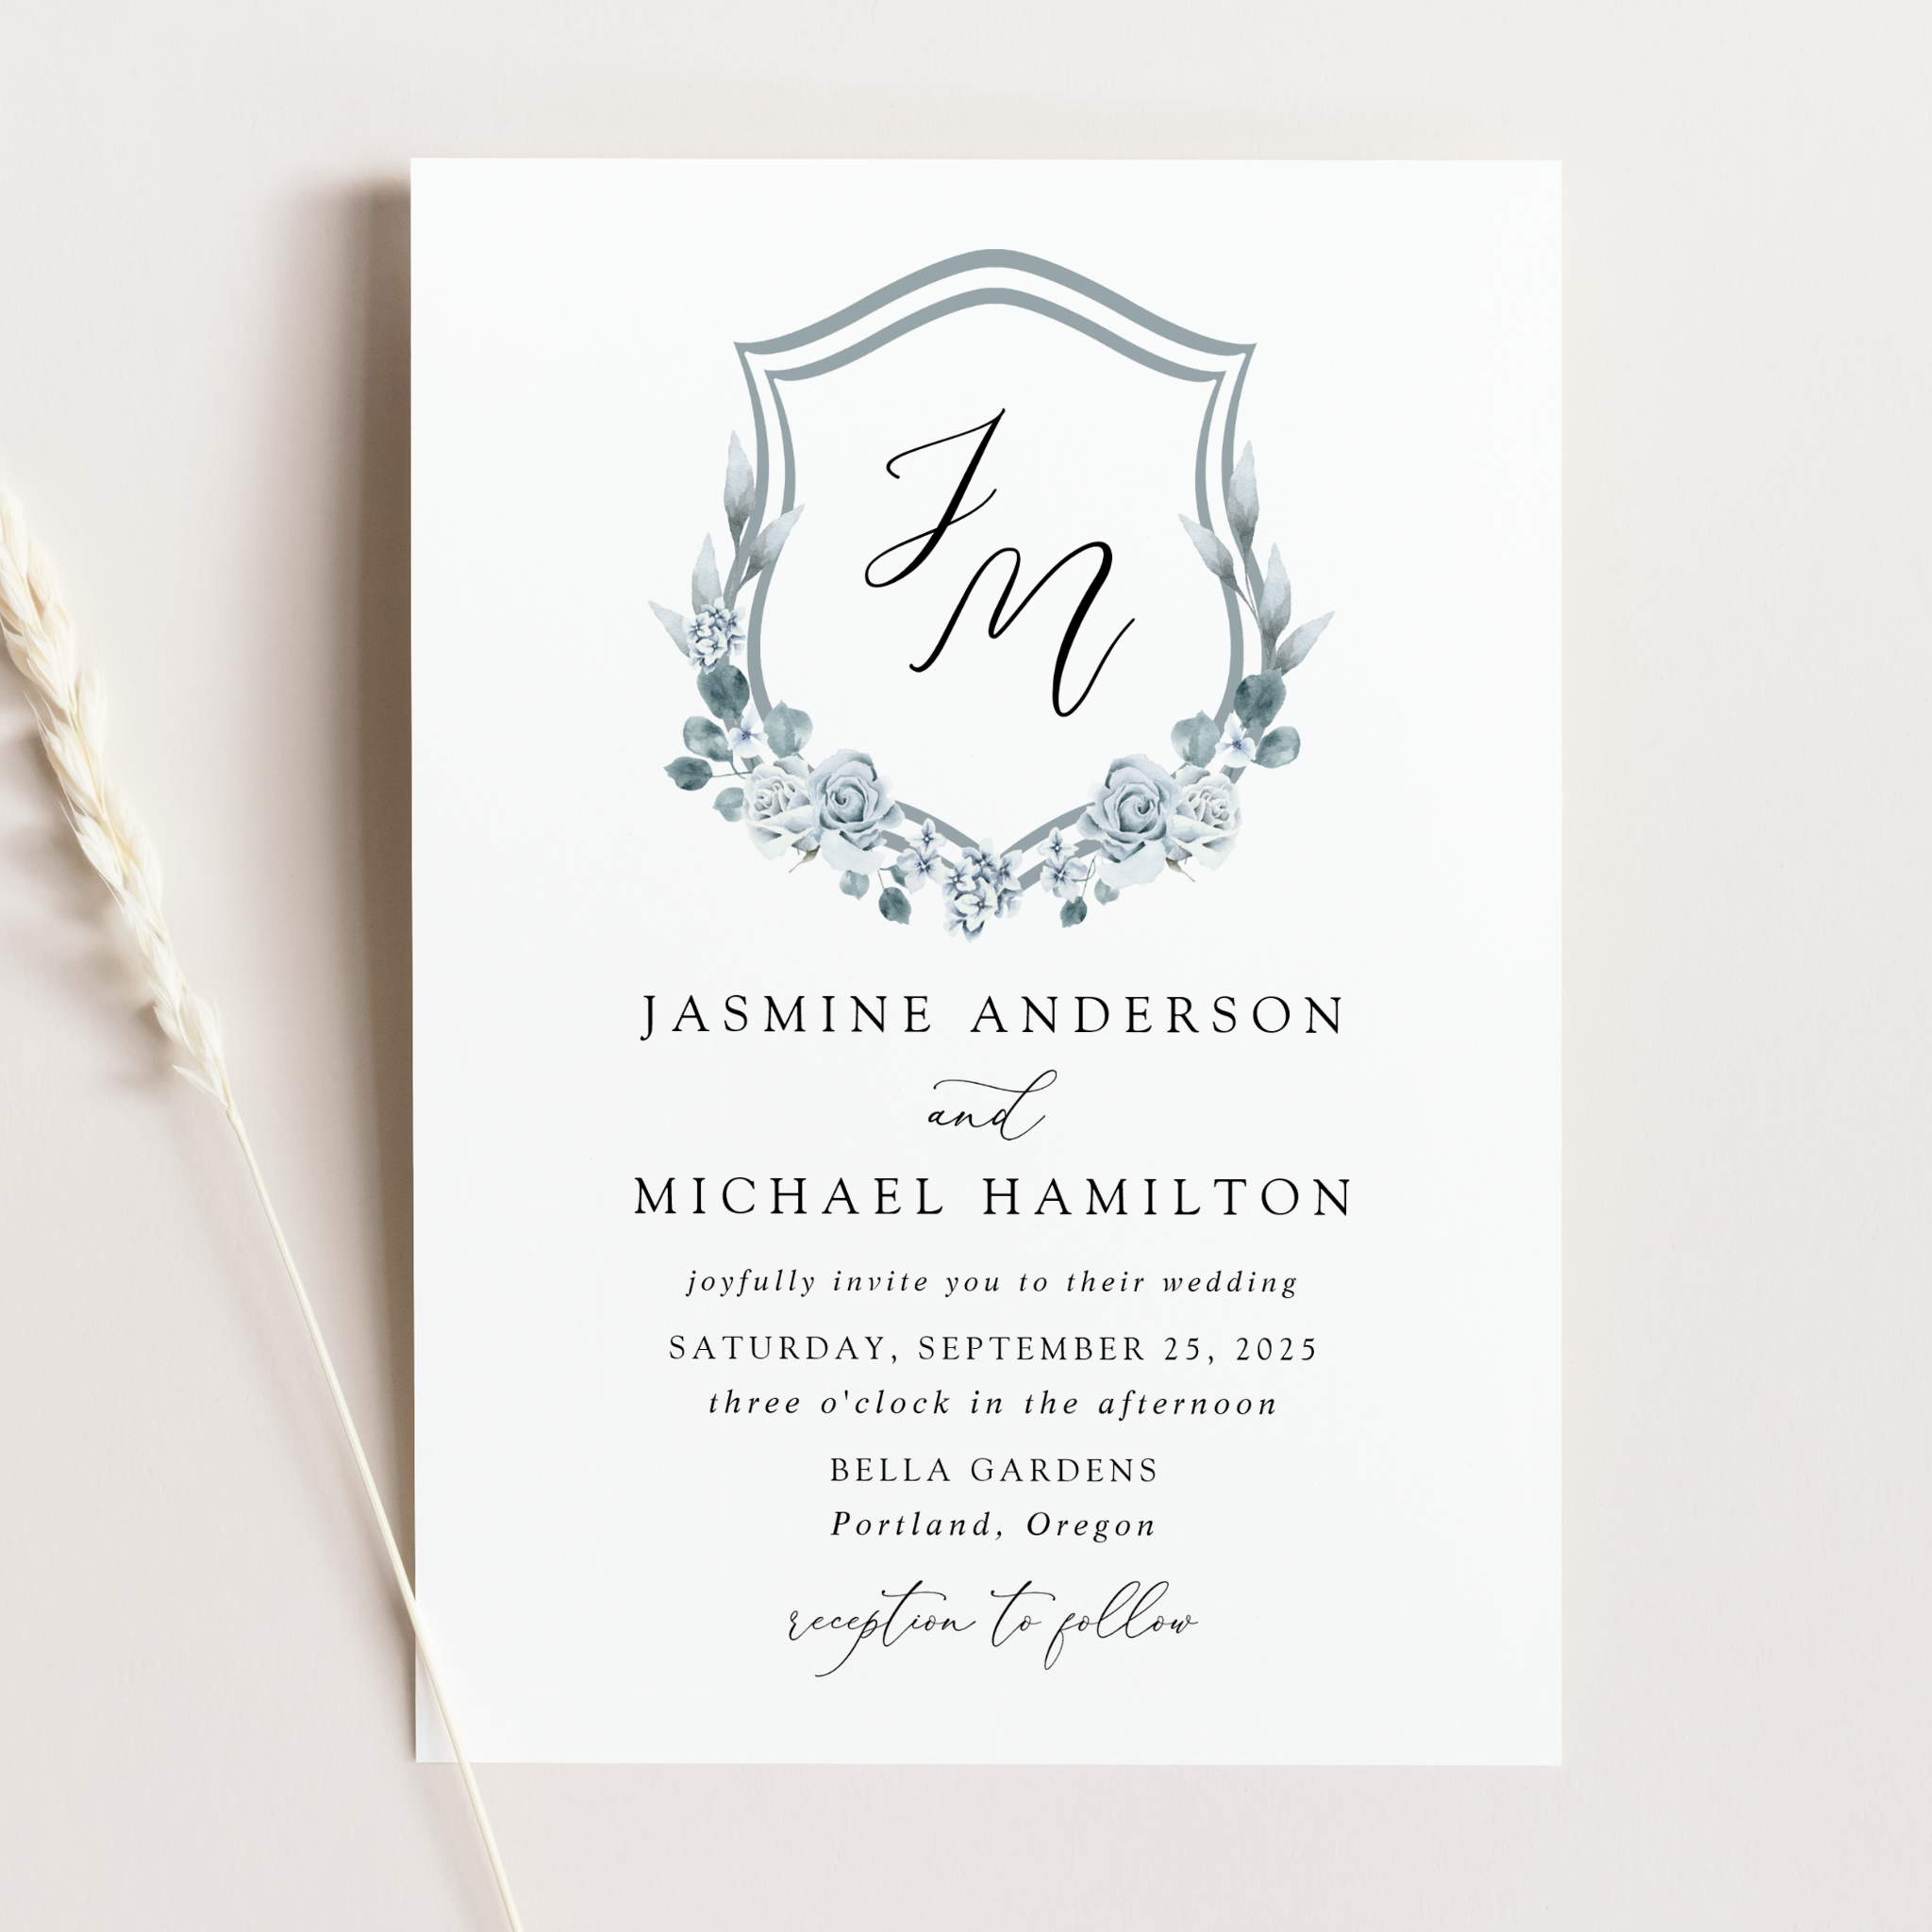 late-bloom-paperie_weddings_cover-photos_elegant-dusty-blue-floral-crest-1.png